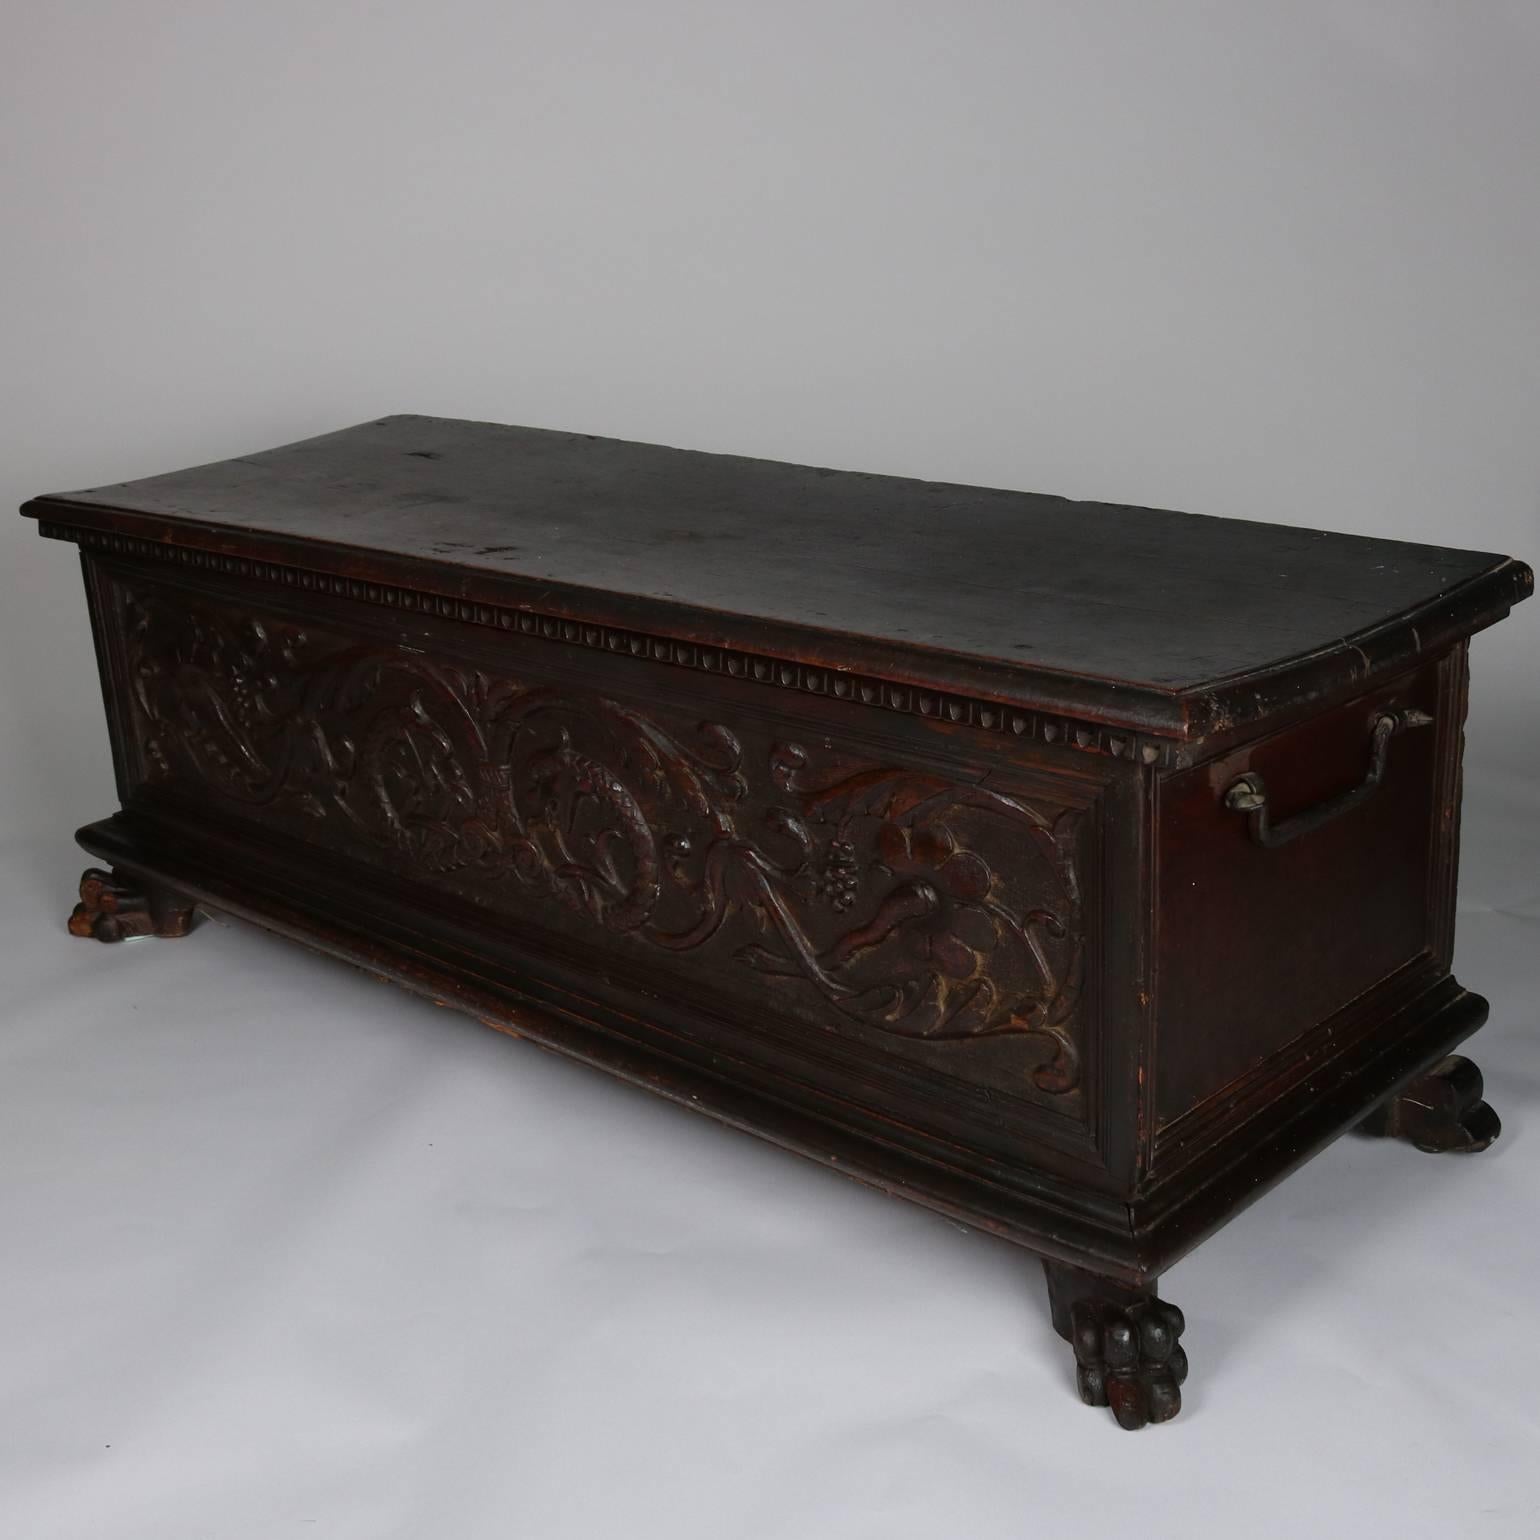 18th century Italian black walnut cassone (marriage chest) features carved foliate and dolphin front panel, egg and dart trim, paw feet, hand-forged iron handles and interior ram's head hinges.

Measures - 20" H x 55" W x 21.5" D.